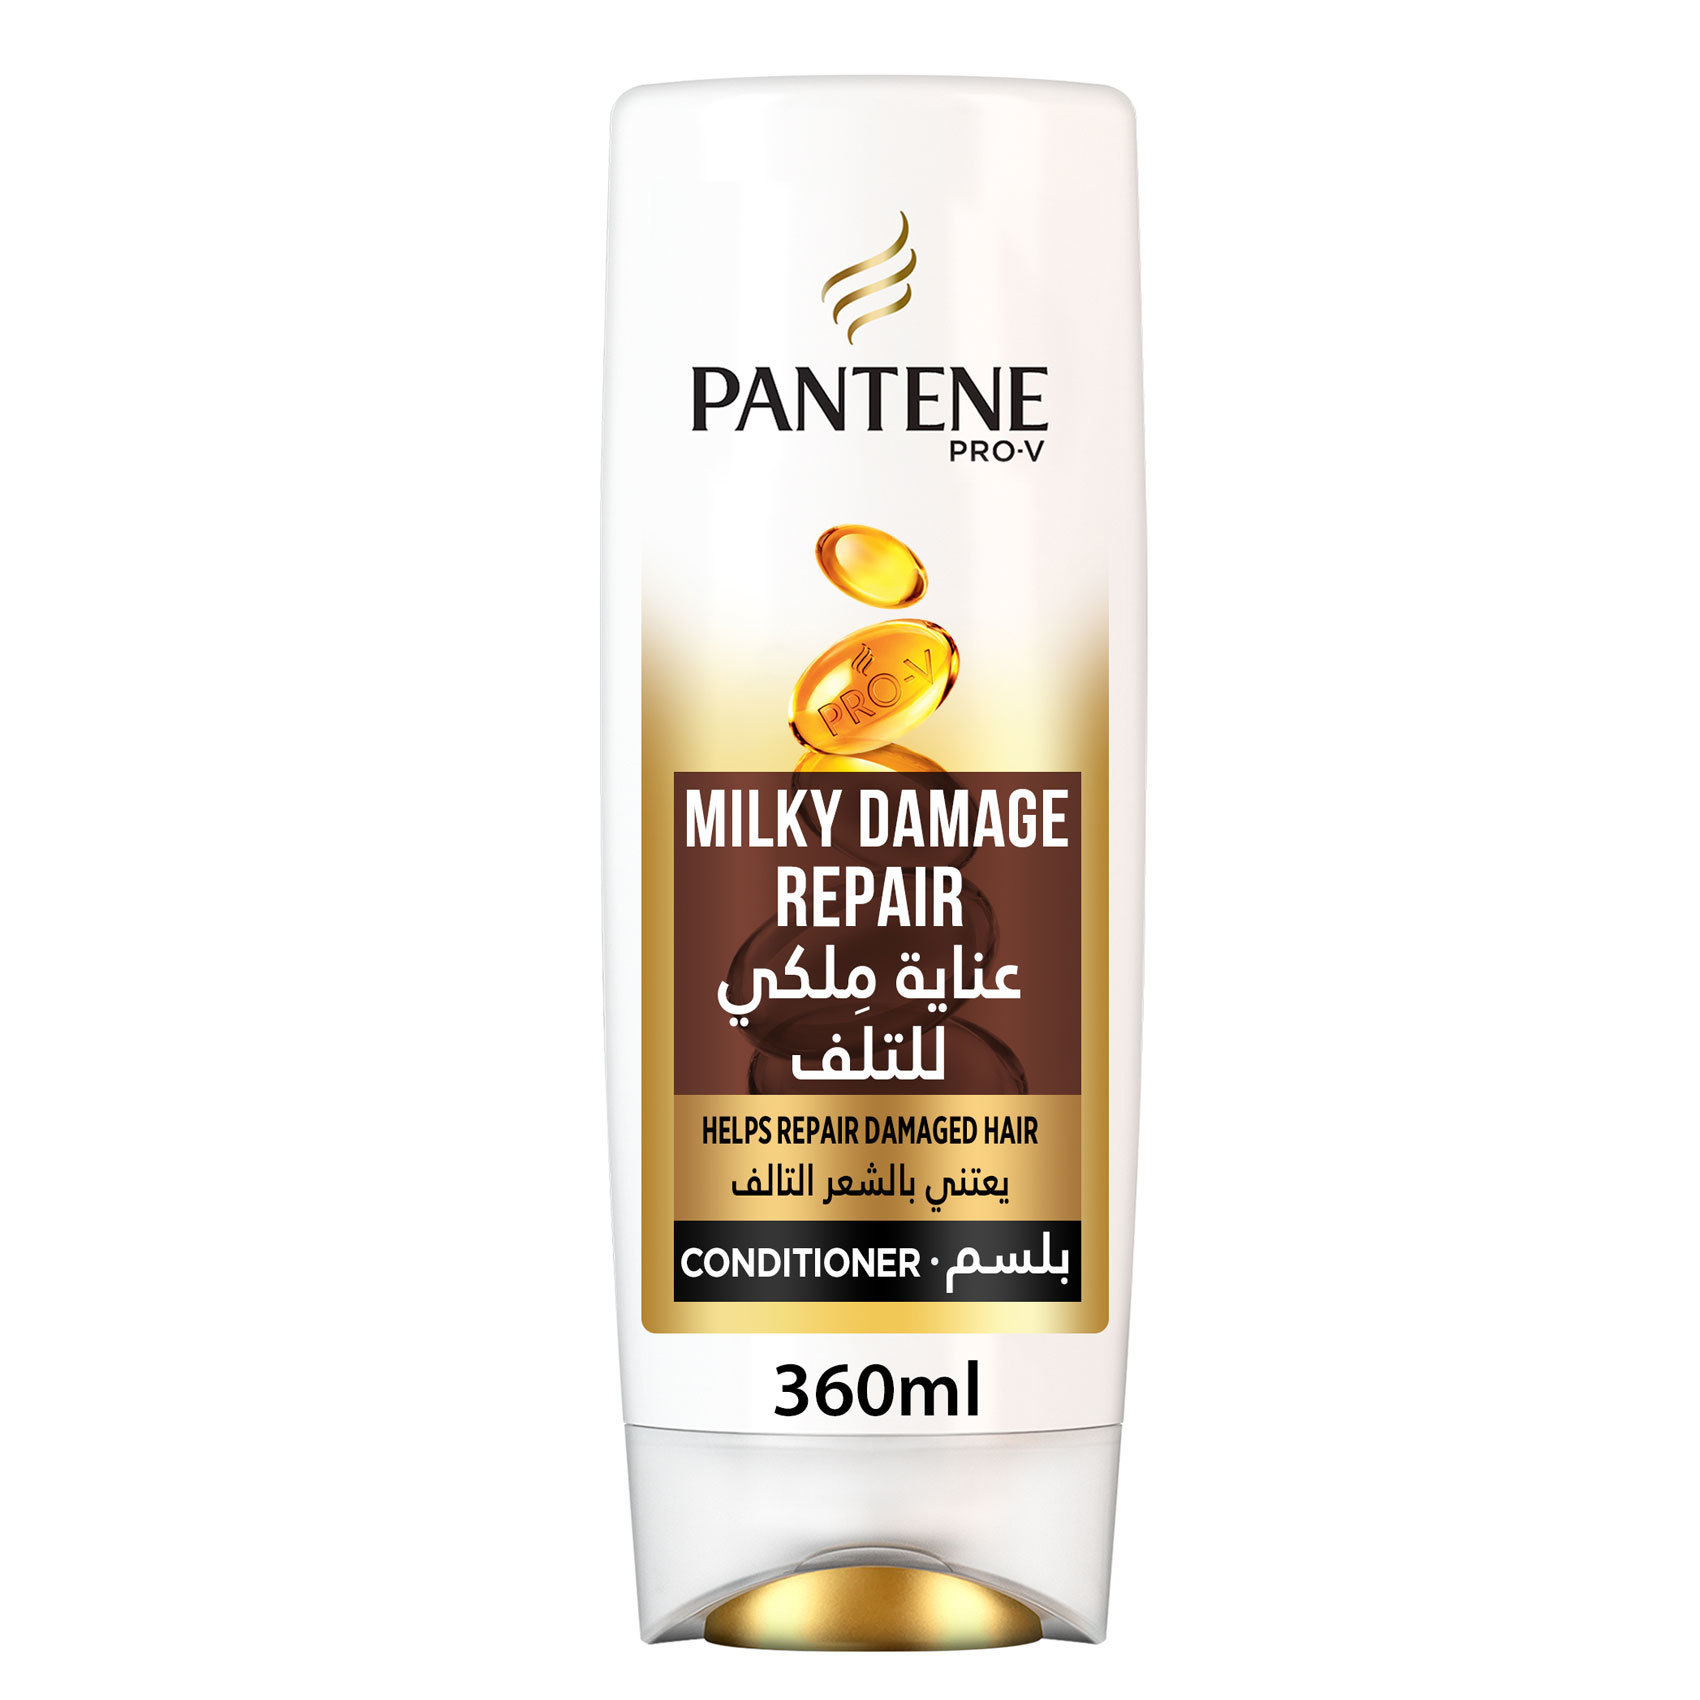 Buy Pantene Pro V Milky Damage Repair Conditioner 360ml Online Shop Beauty Personal Care On Carrefour Uae